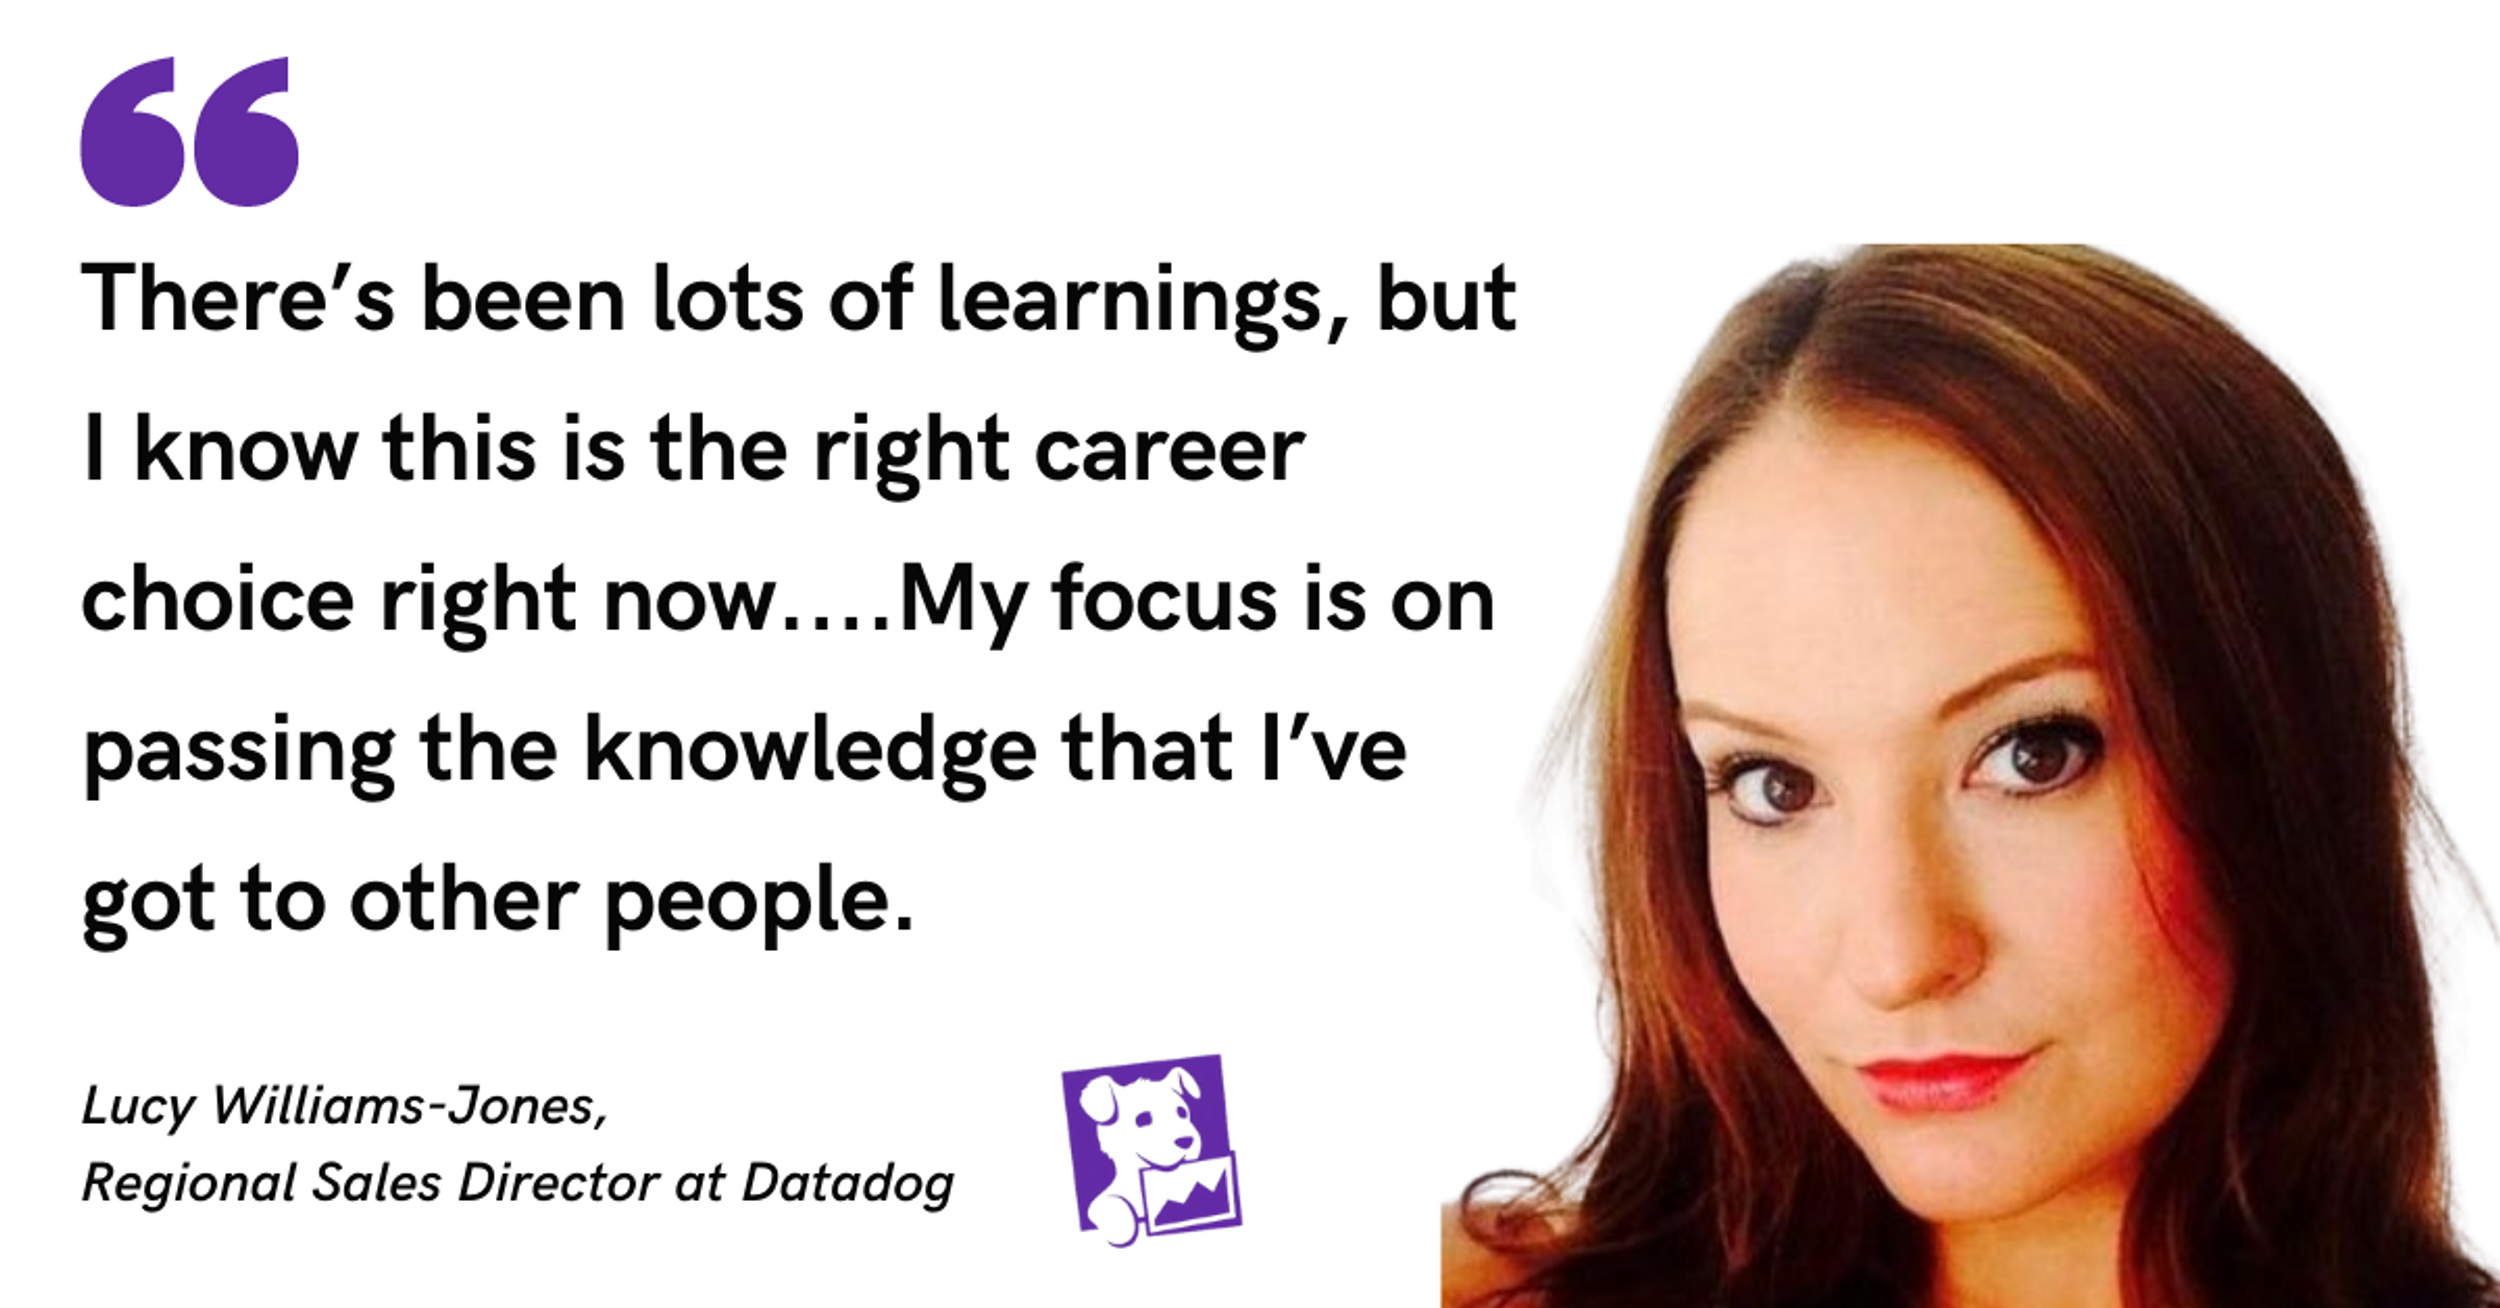 Blog post header with quote from Lucy Williams-Jones, Regional Sales Director at Datadog